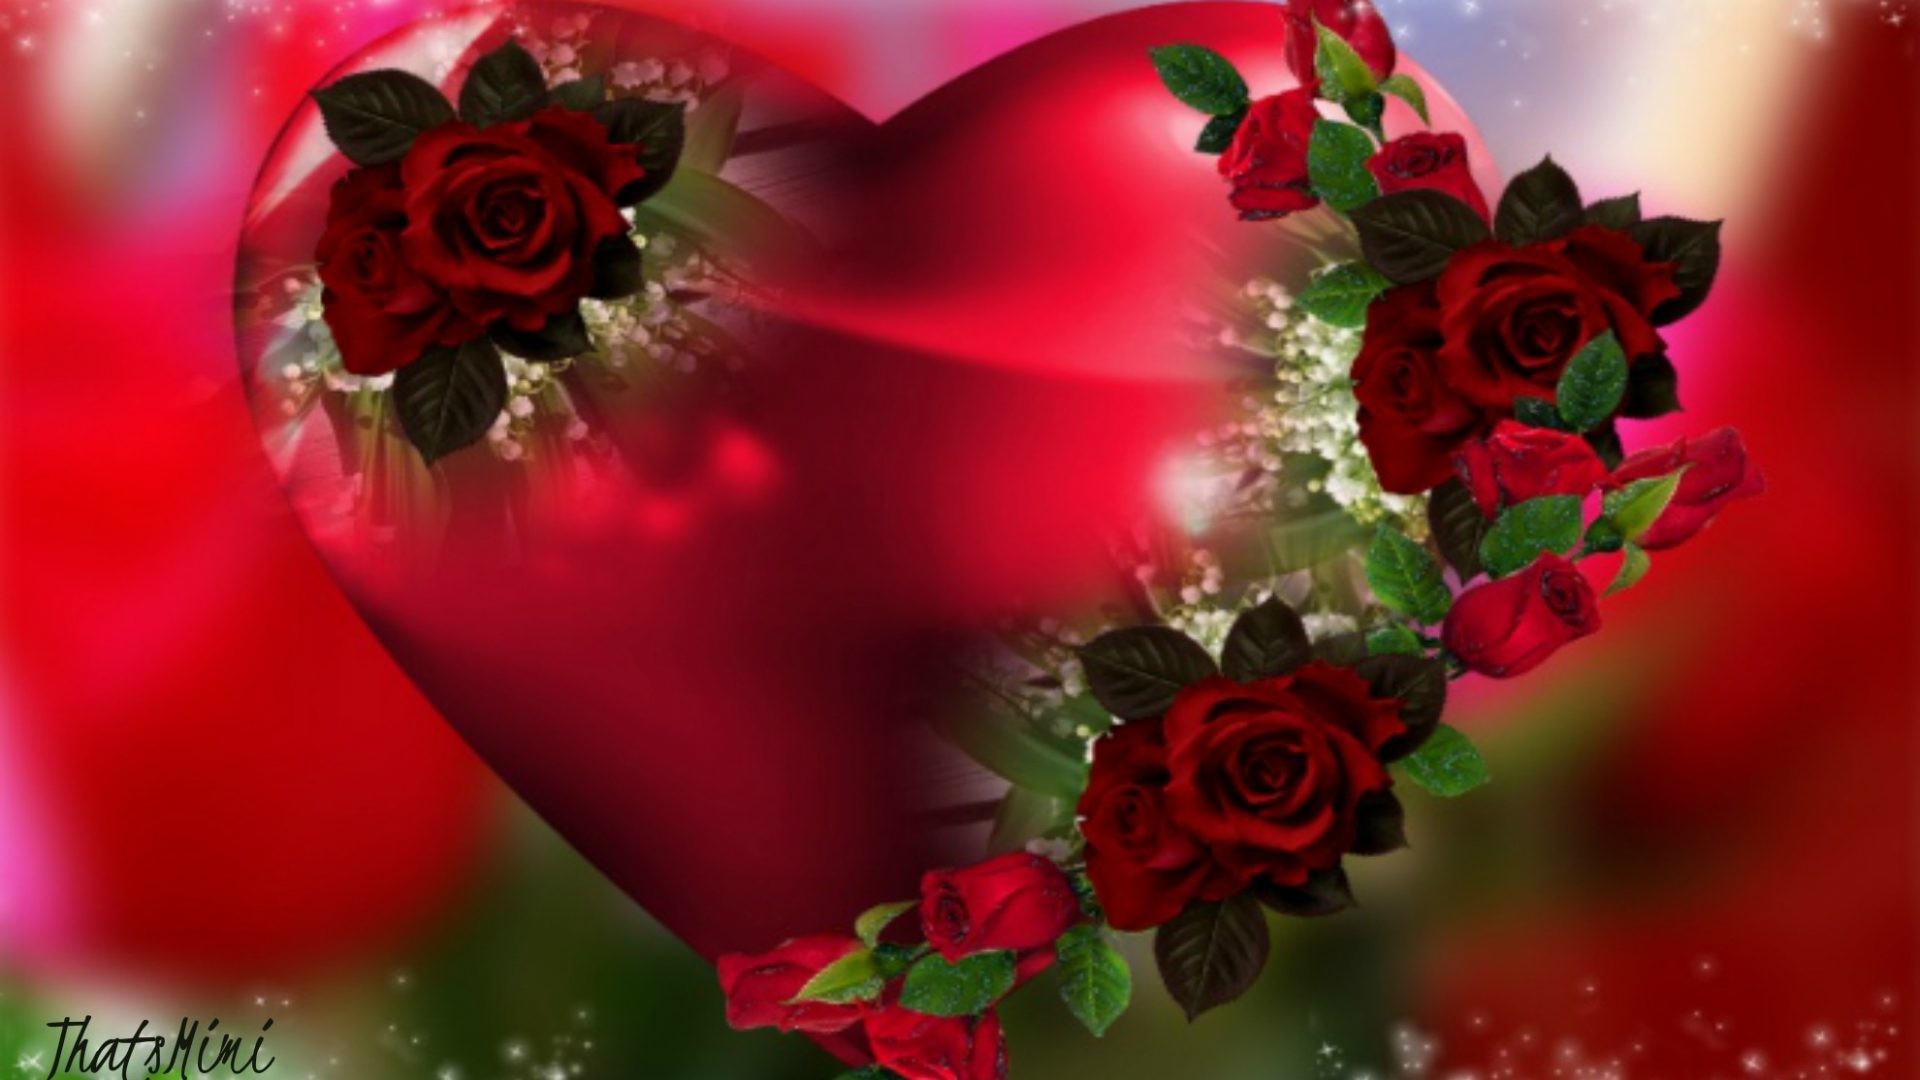 1920x1080 Heart Tag - Heart Flower Valentine Beautiful Romantic Roses Pretty Red Love  Flowers Wallpapers New for